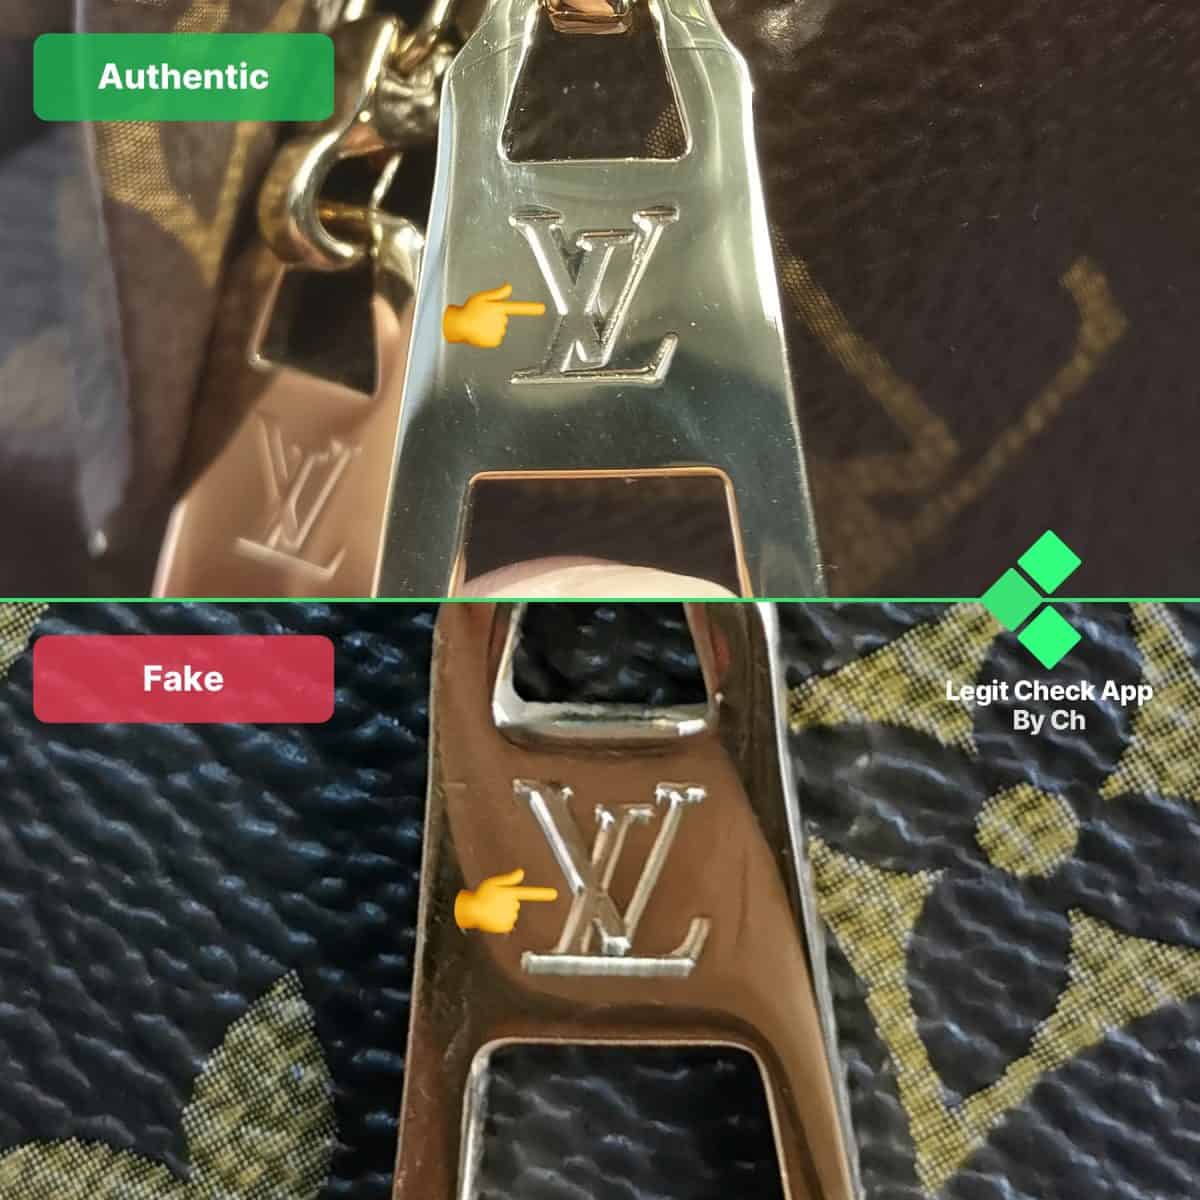 Louis Vuitton Bumbag Fake Vs Real: How-To Guide